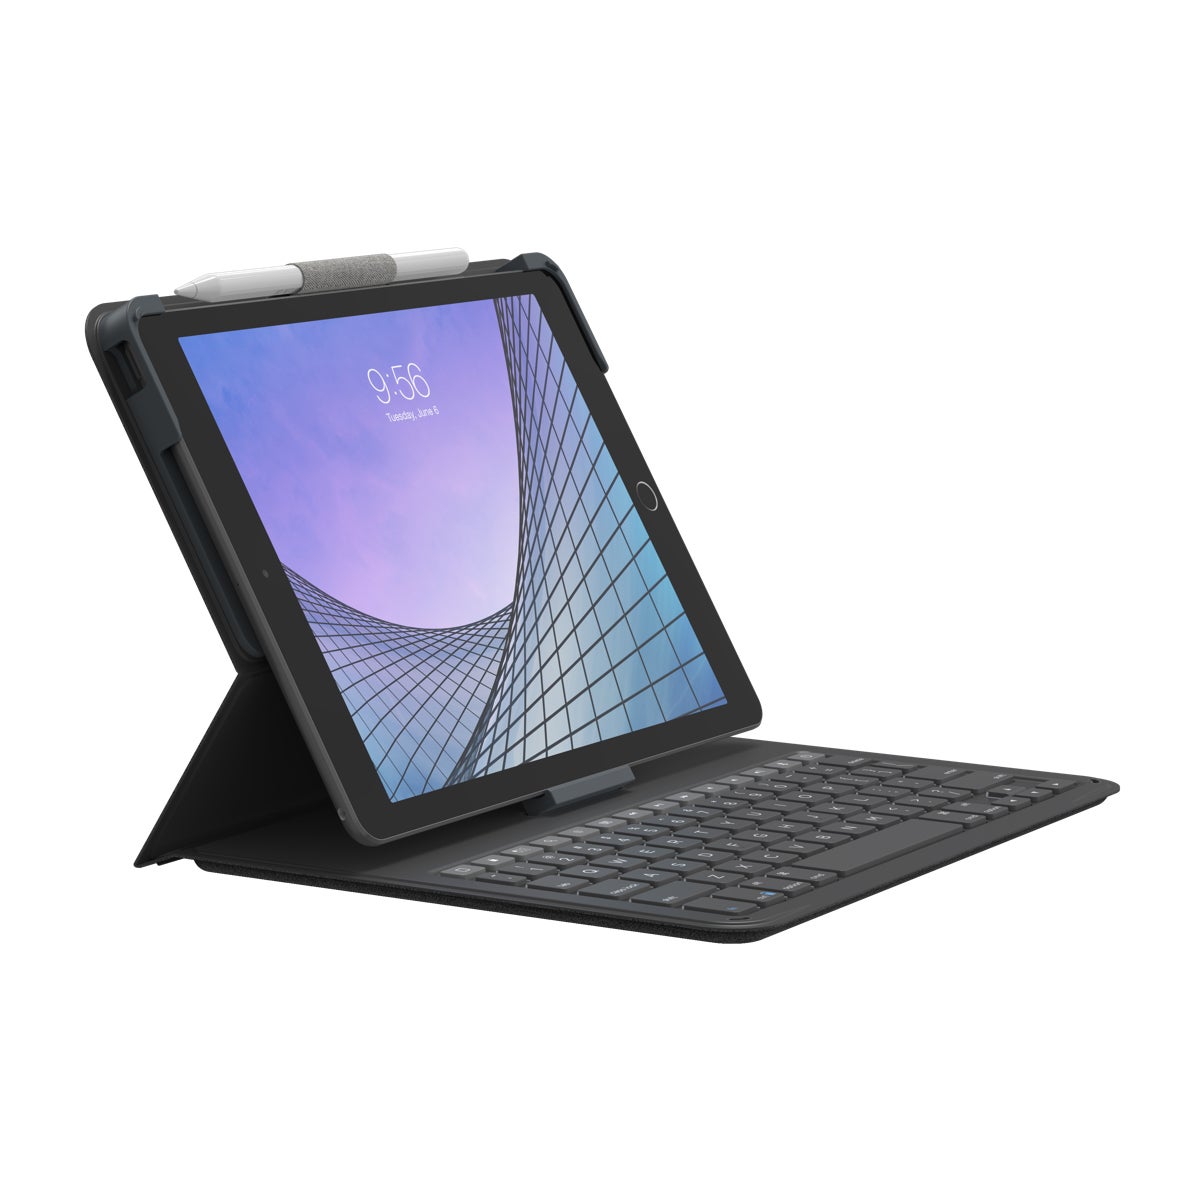 ZAGG - Messenger Folio 2 - Tablet Keyboard & Case for 10.2-inch iPad, 10.5-inch iPad/Air 3 - image 1 of 9